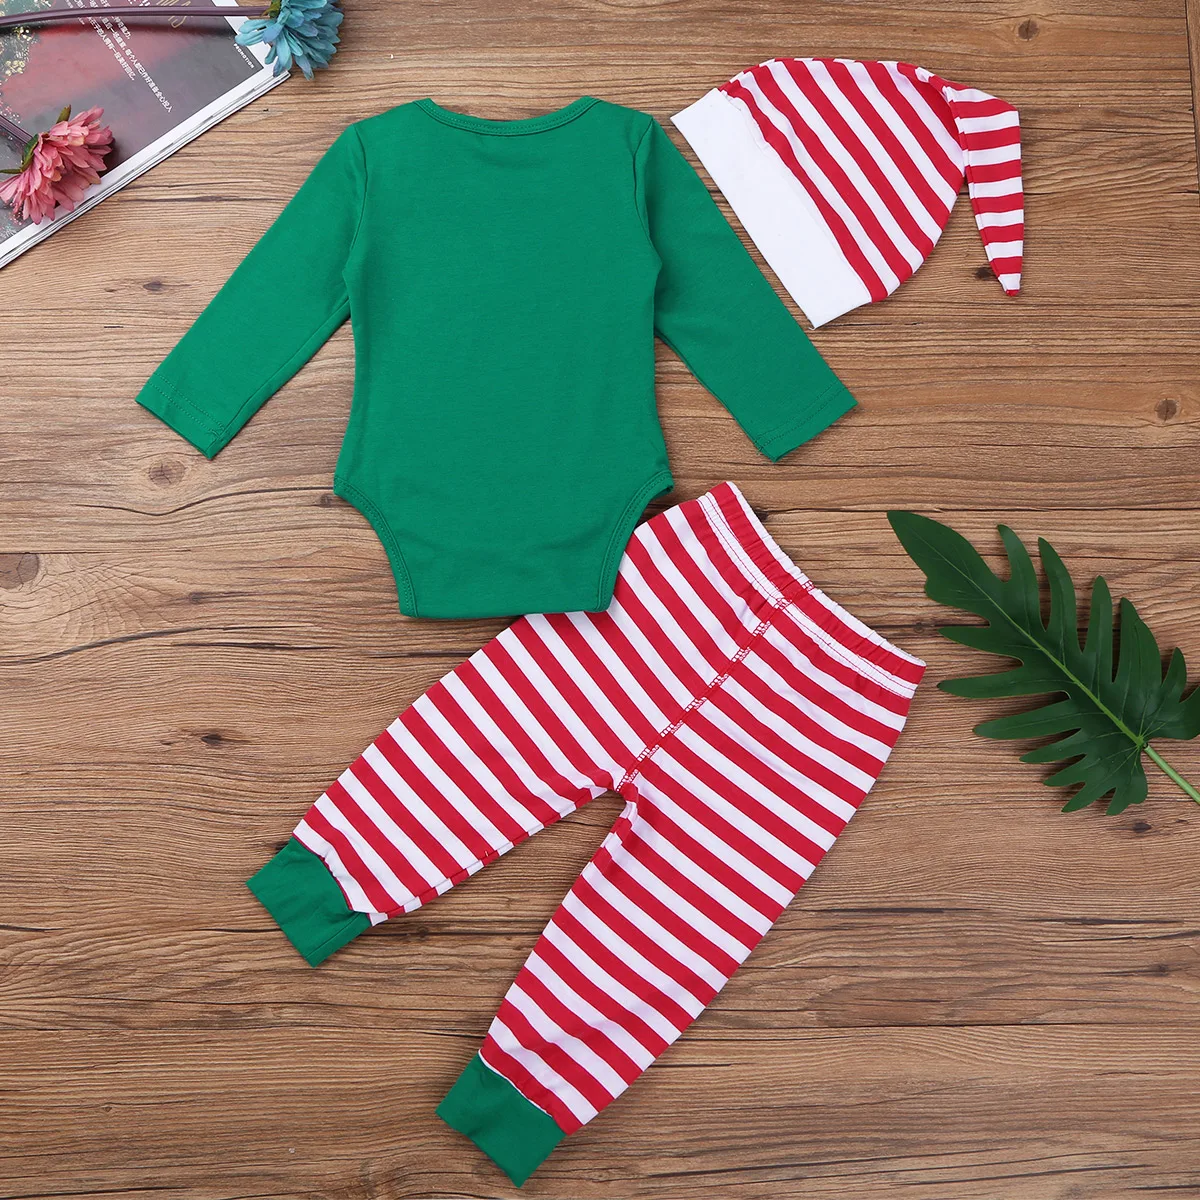 Jackets Baby Boy Girl Autumn Christmas Xmas Clothes Set Toddler Baby Boys Girls Romper Pant Hat Outfits Christmas Elf Cosplay Costume